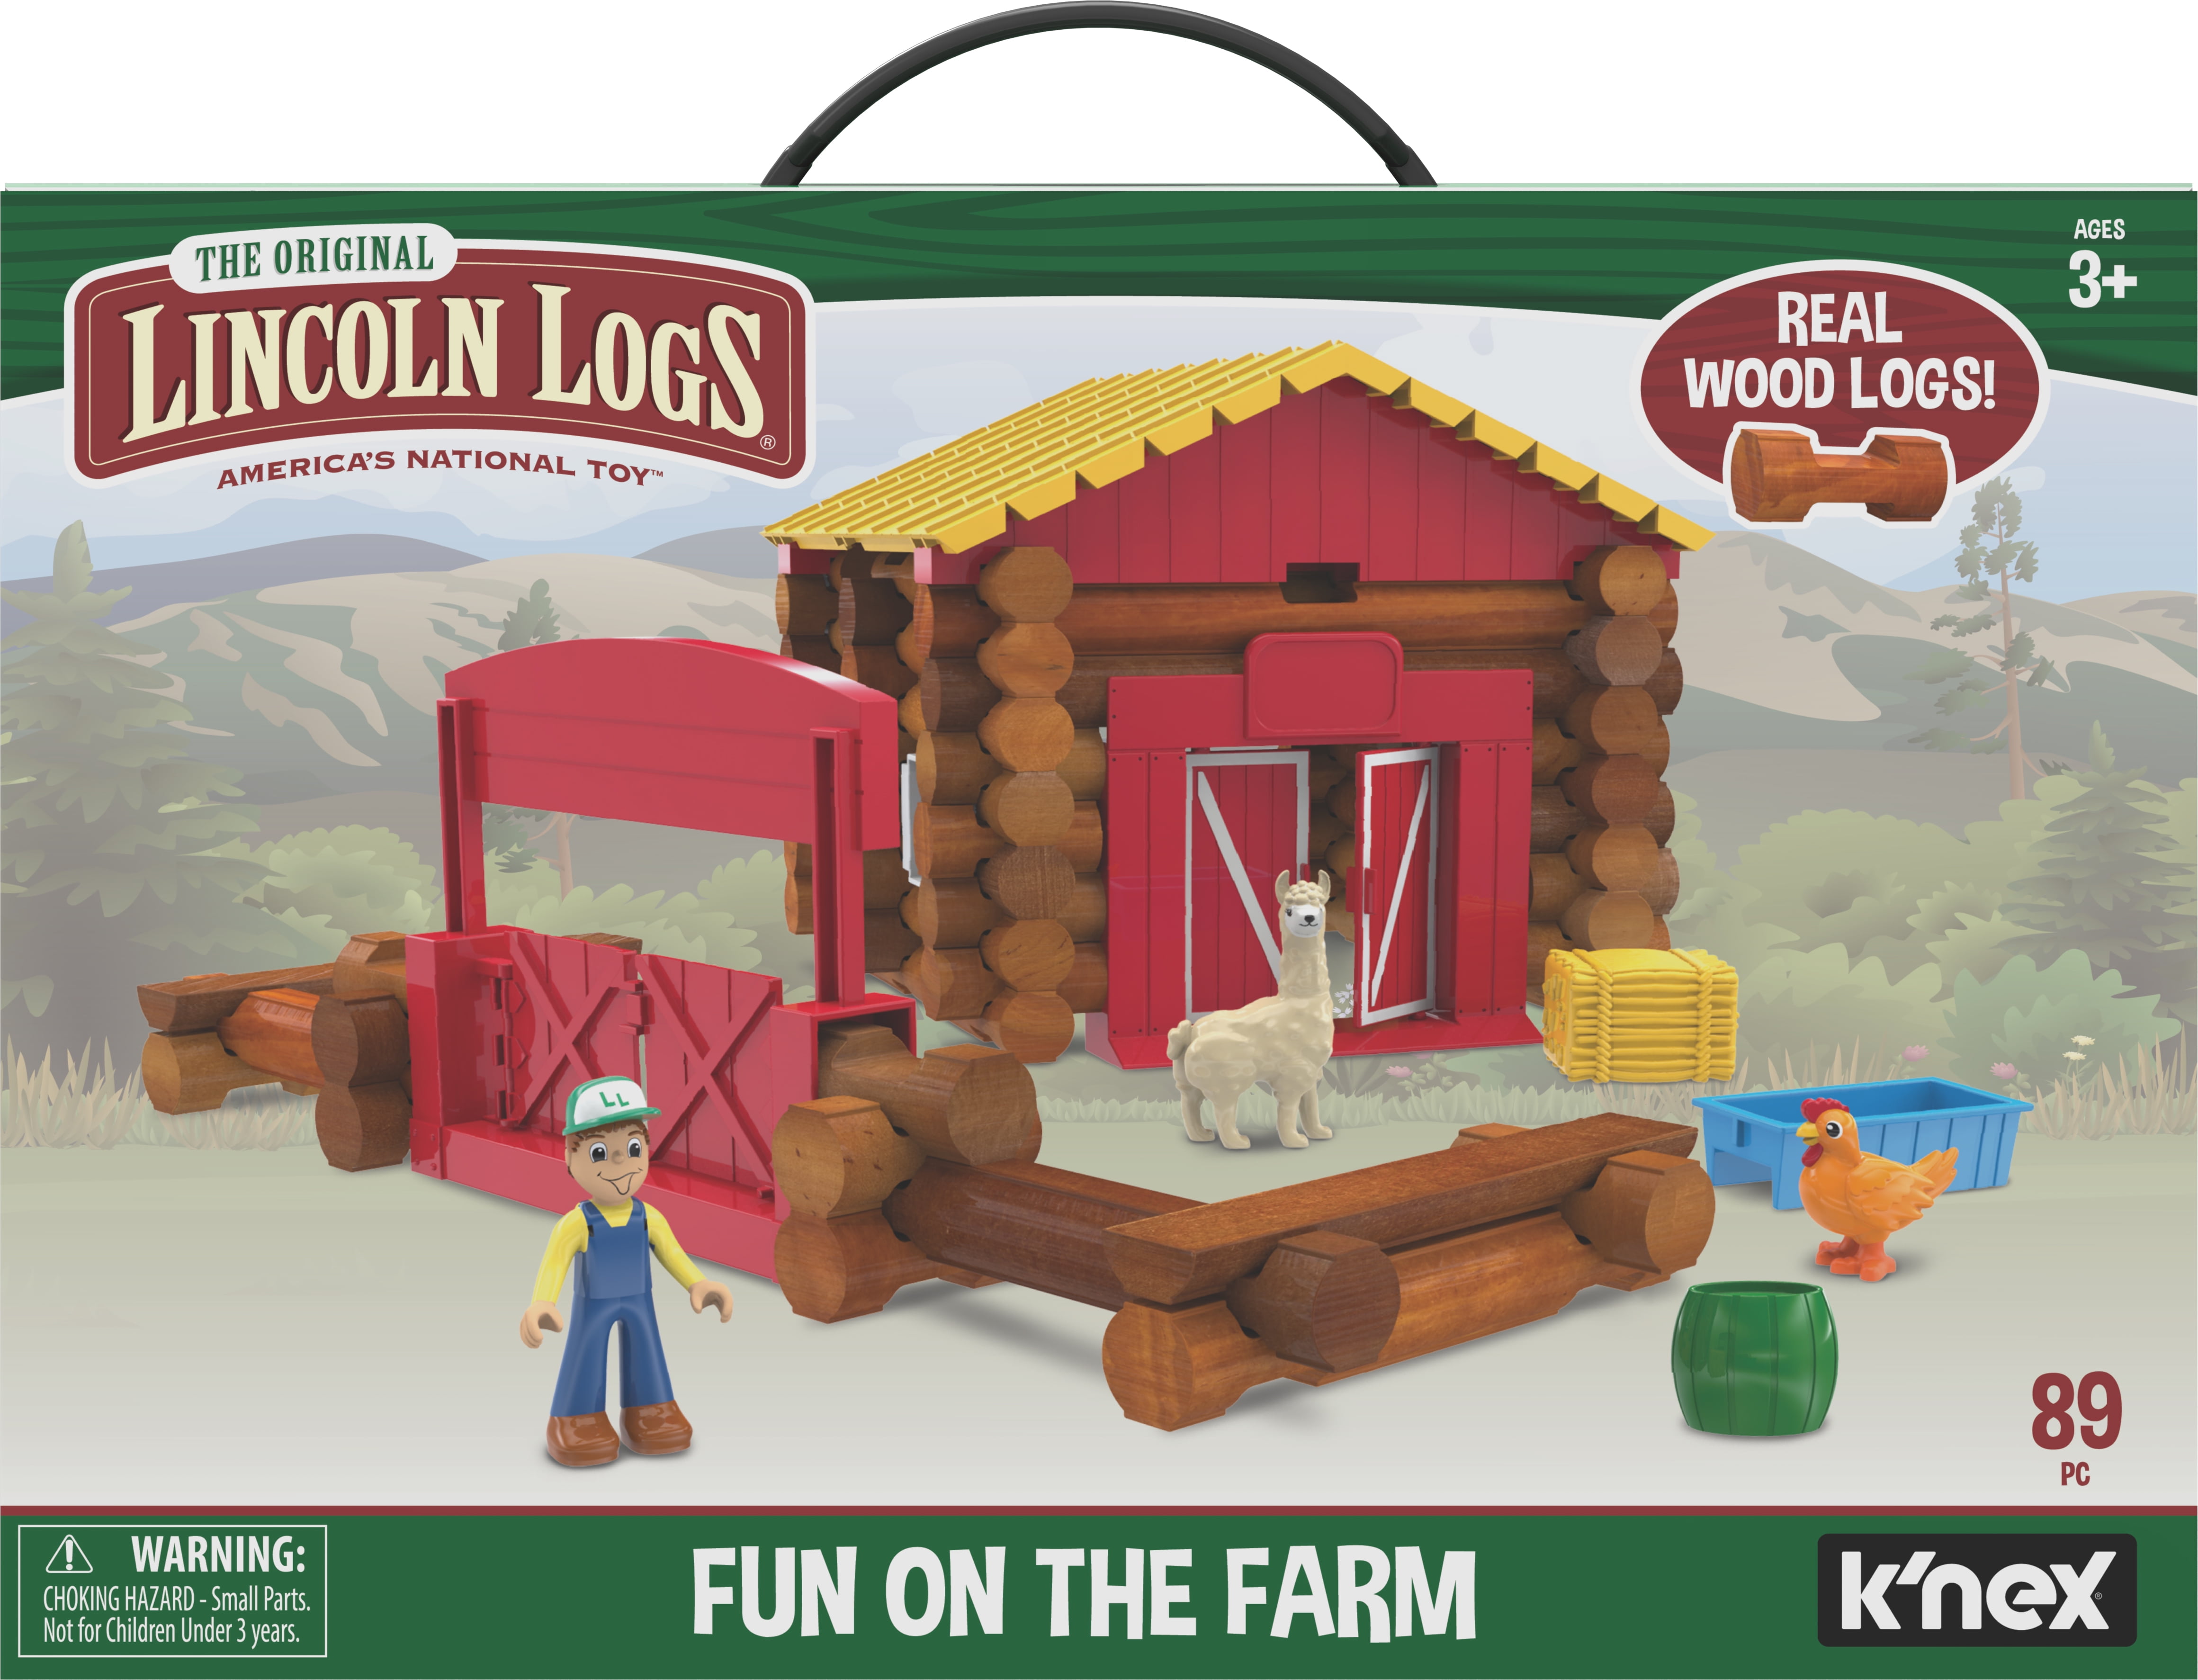 00854 K'nex Lincoln Logs 100th Anniversary Tin Building Set Ages 3 for sale online 